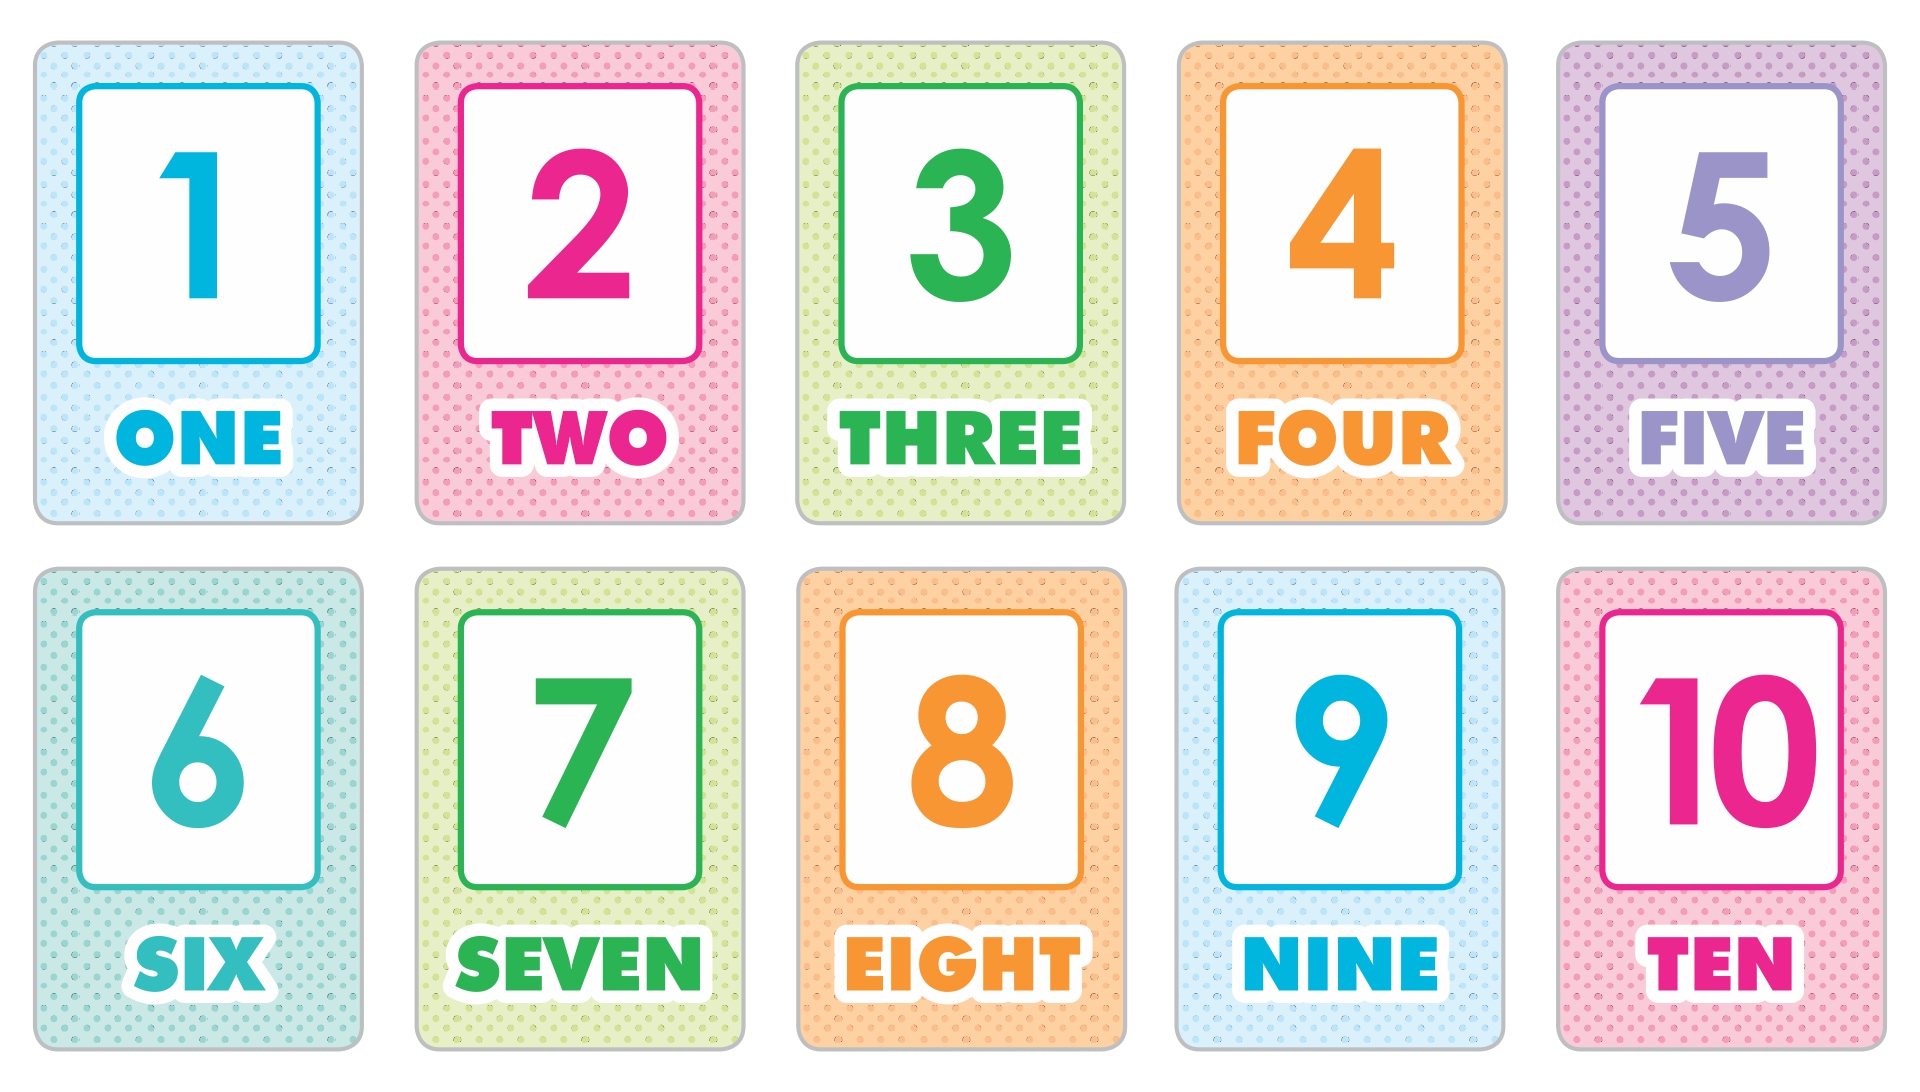 4-best-images-of-large-printable-number-cards-1-20-6-best-images-of